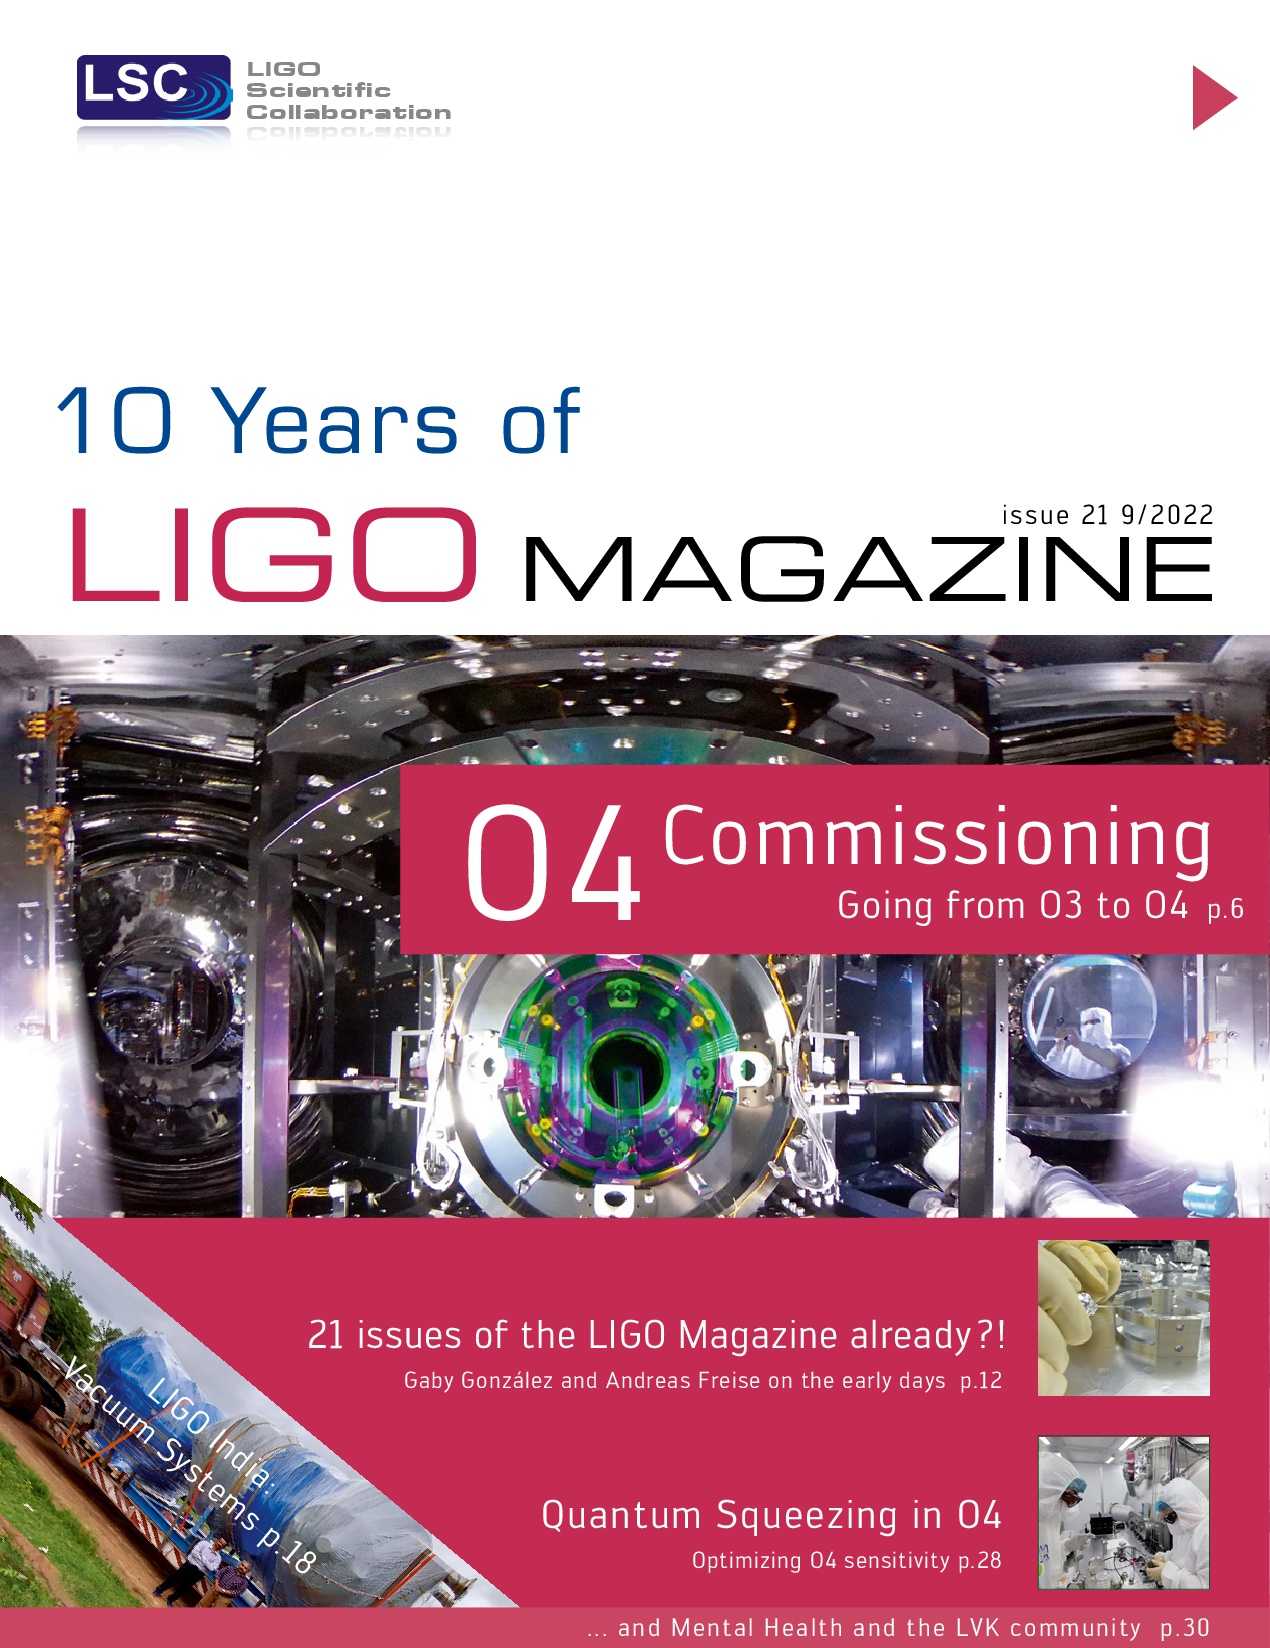 News-Image 6 of: New LIGO Magazine Issue 21 is out